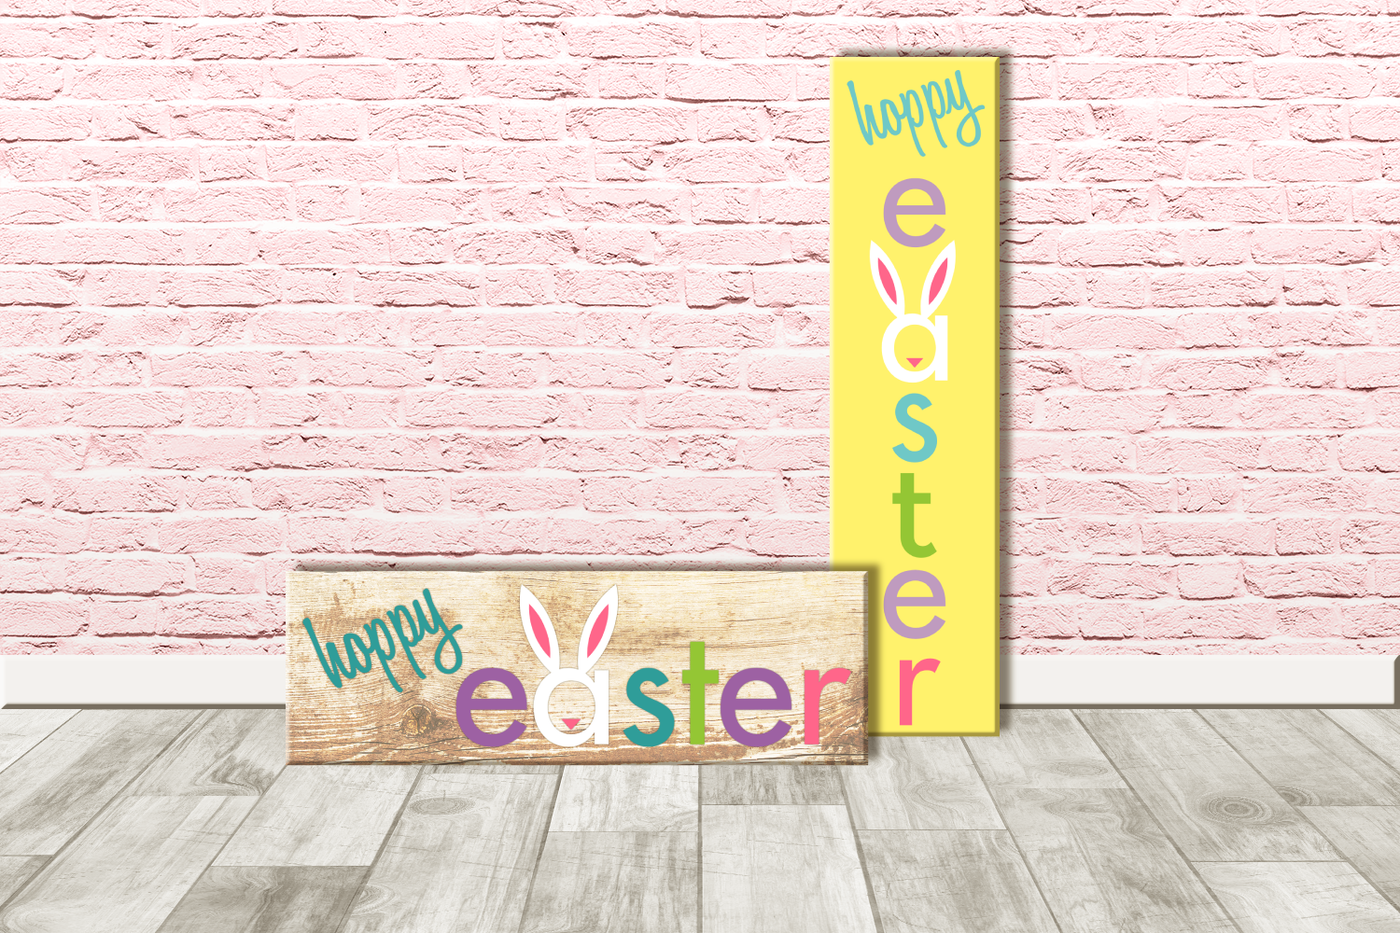 Vertical and horizontal sings that say "hoppy easter" with a stylized to look like a bunny face.